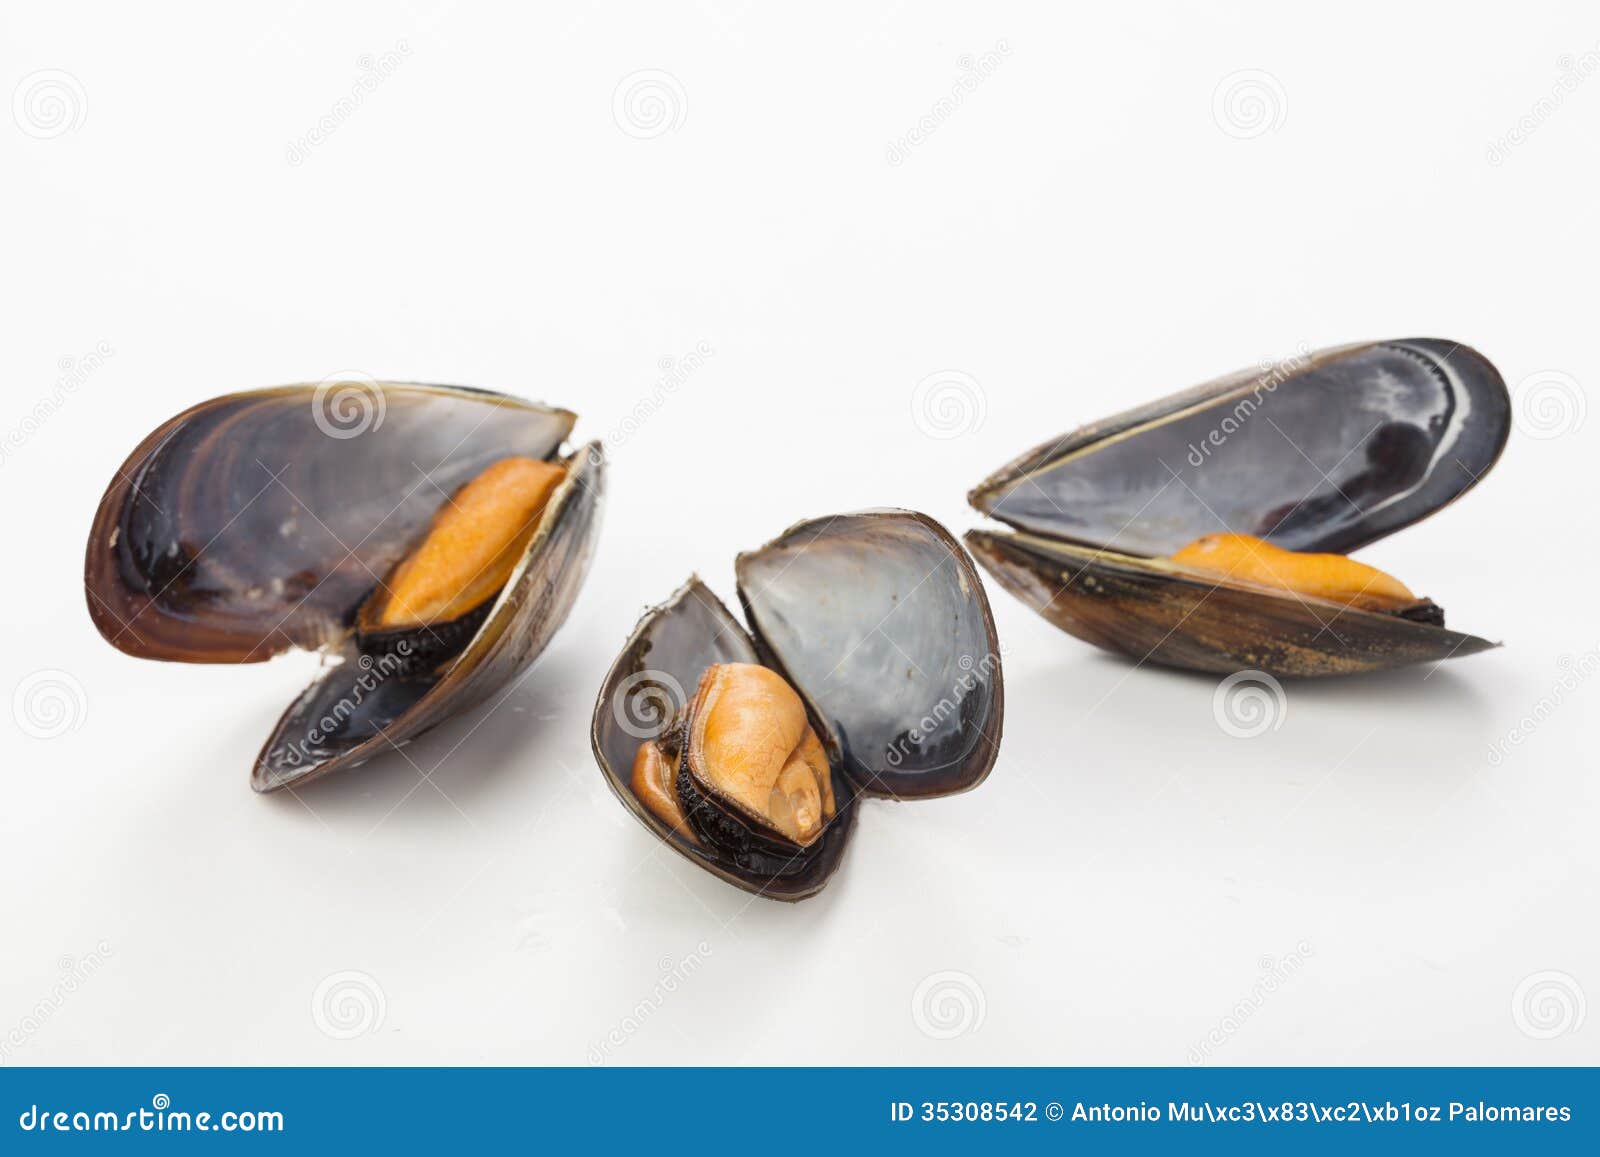 coocked mussels  over white